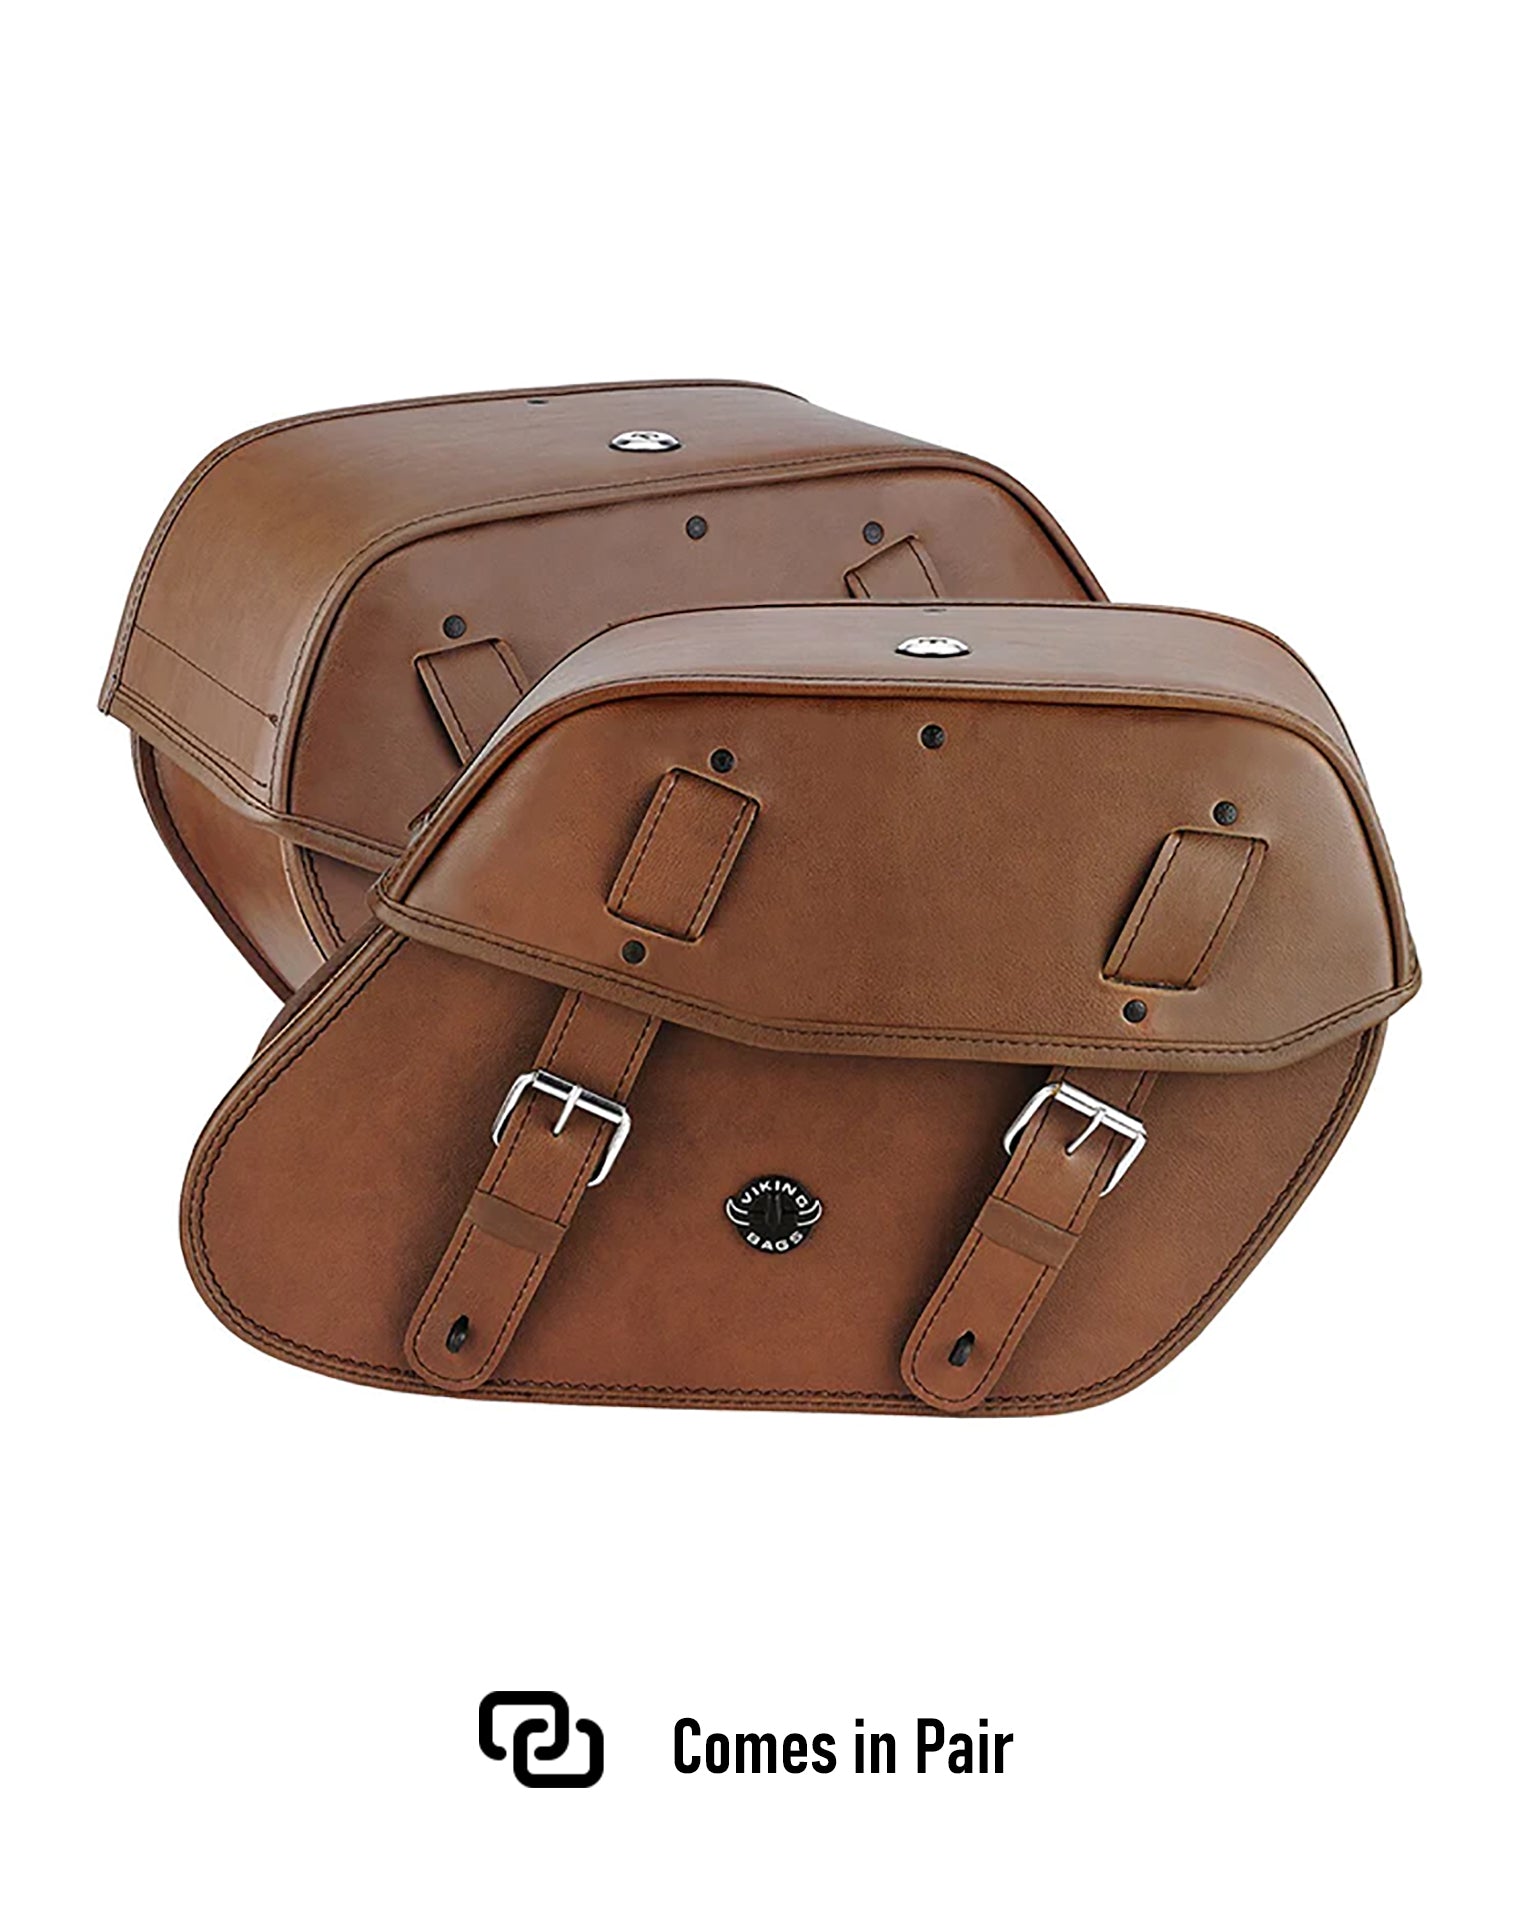 Viking Odin Brown Large Leather Motorcycle Saddlebags For Harley Softail Breakout 114 Fxbr S Weather Resistant Bags Comes in Pair